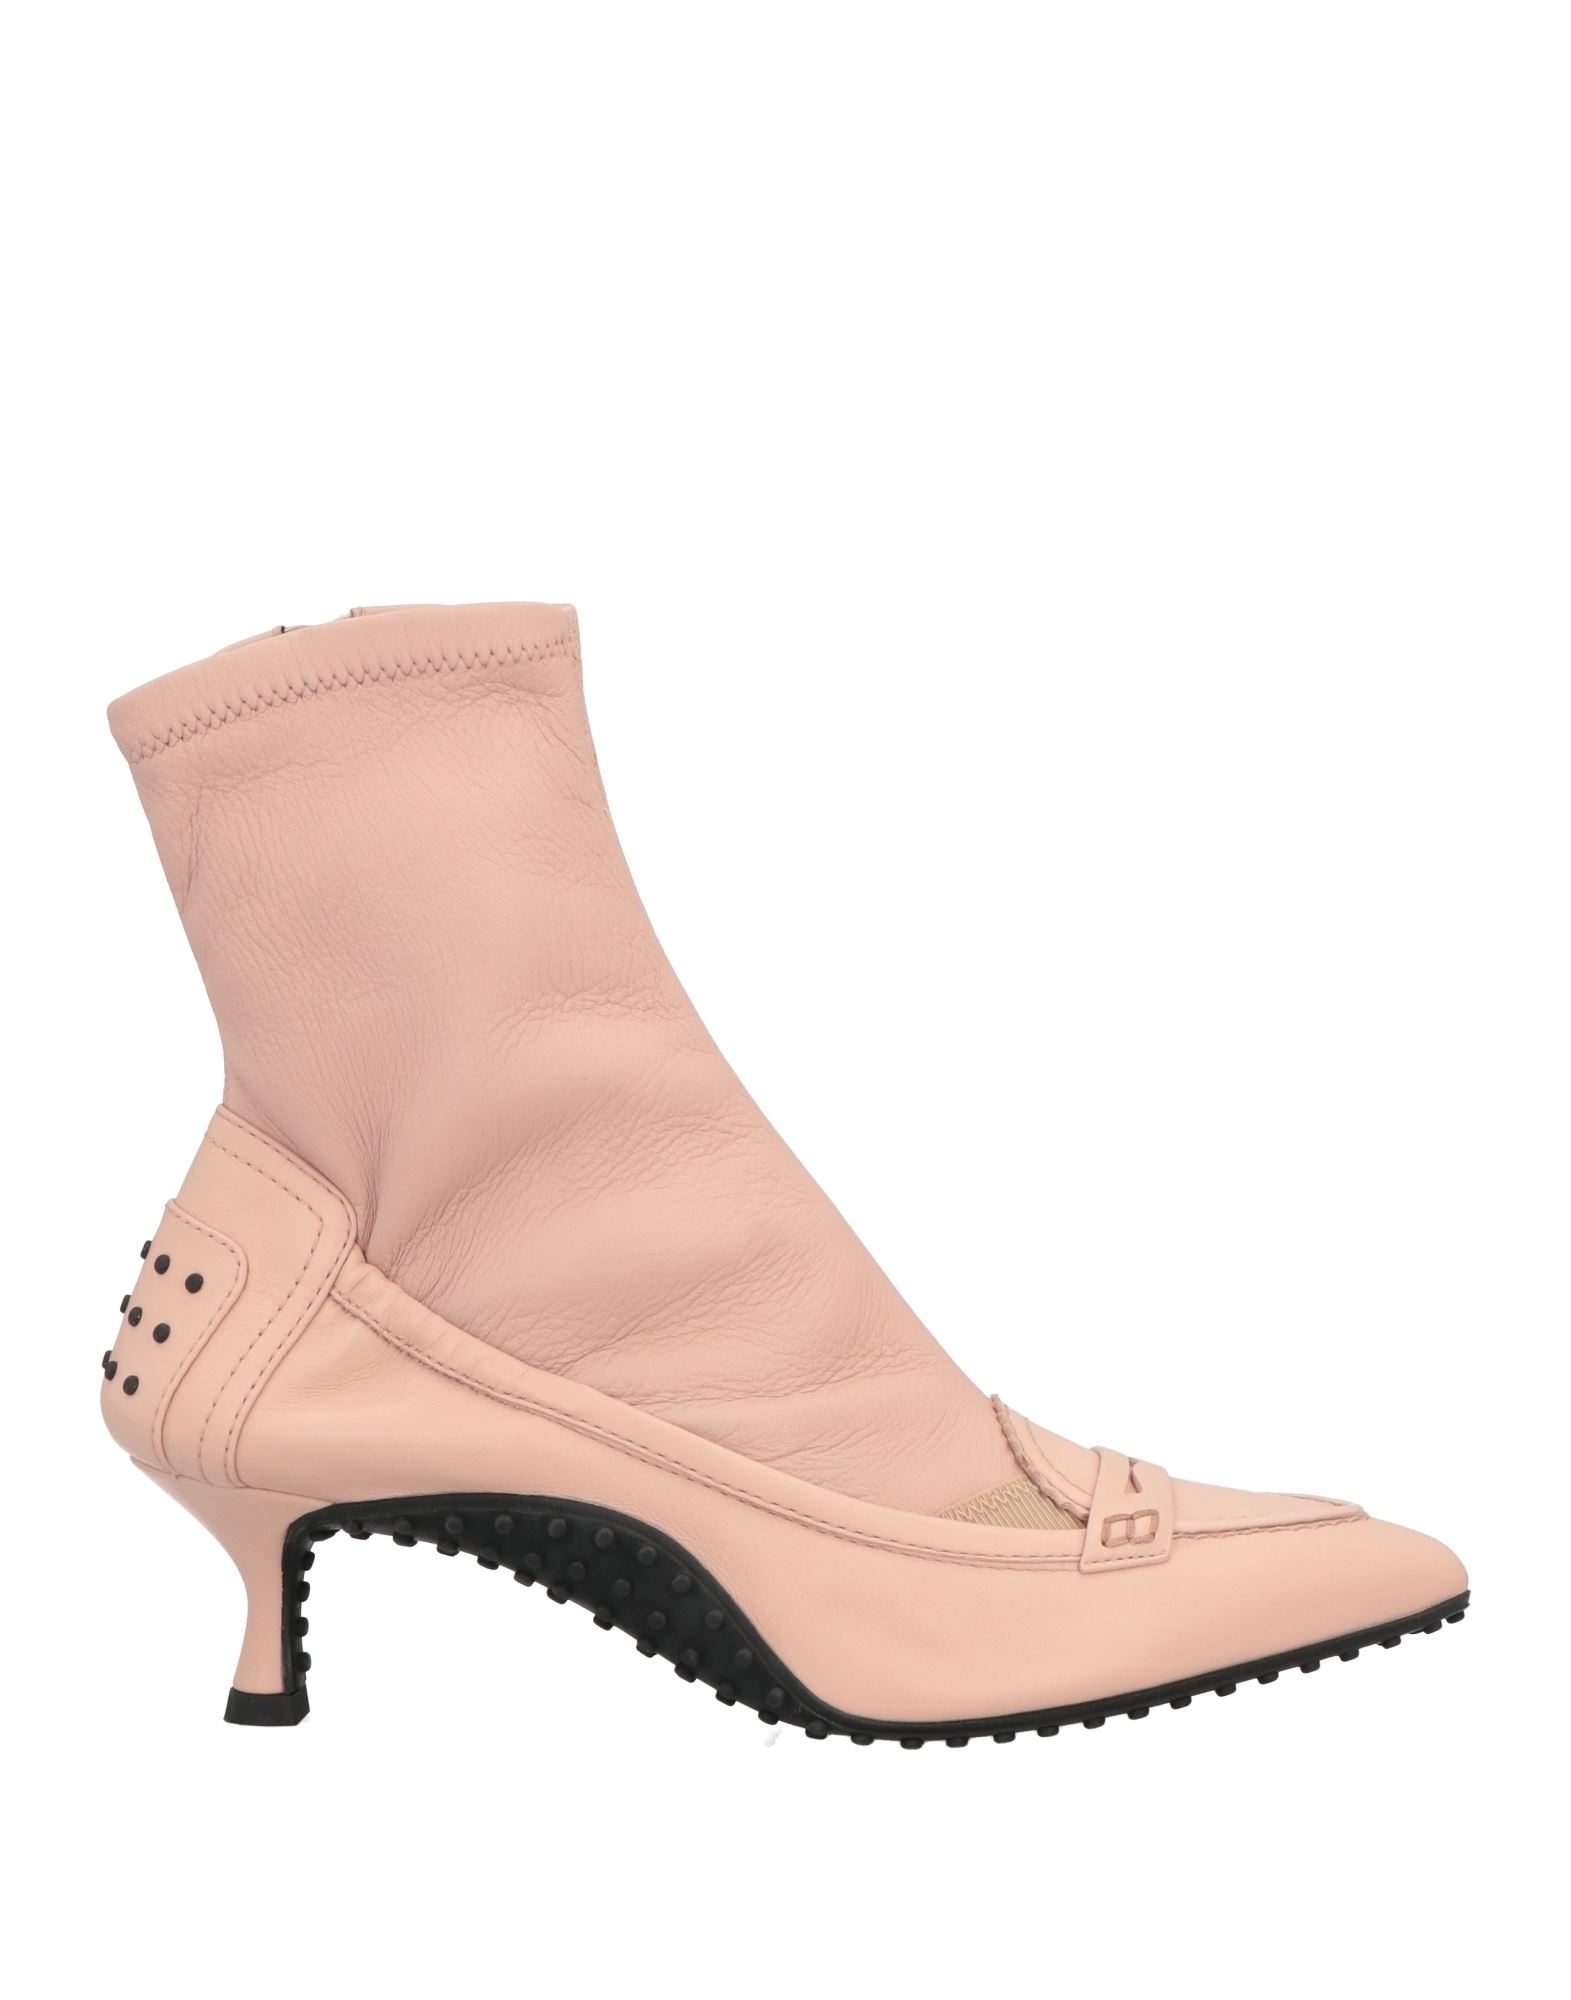 Alessandro Dell'acqua X Tod's Ankle Boots In Blush